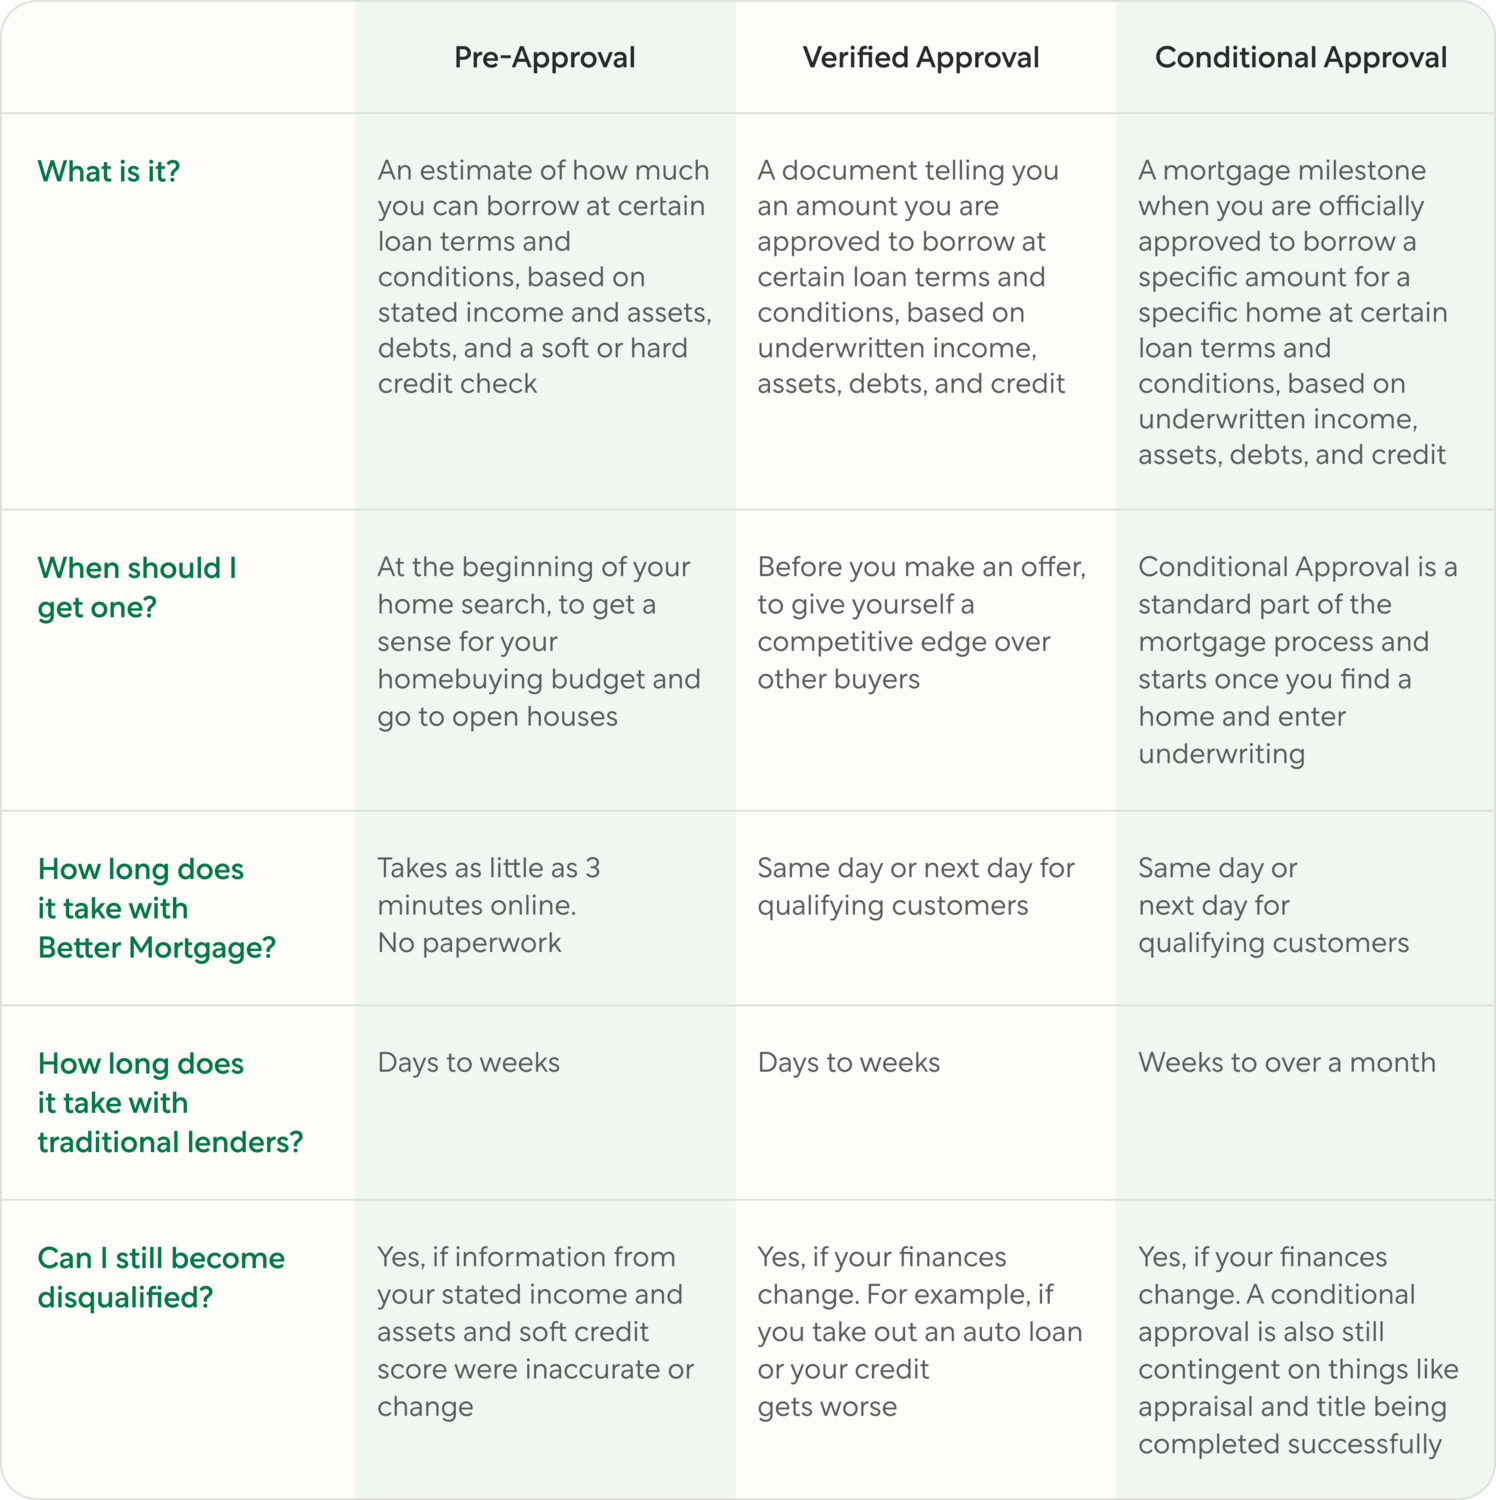 Pre-approval vs verified approval vs conditional approval table comparison